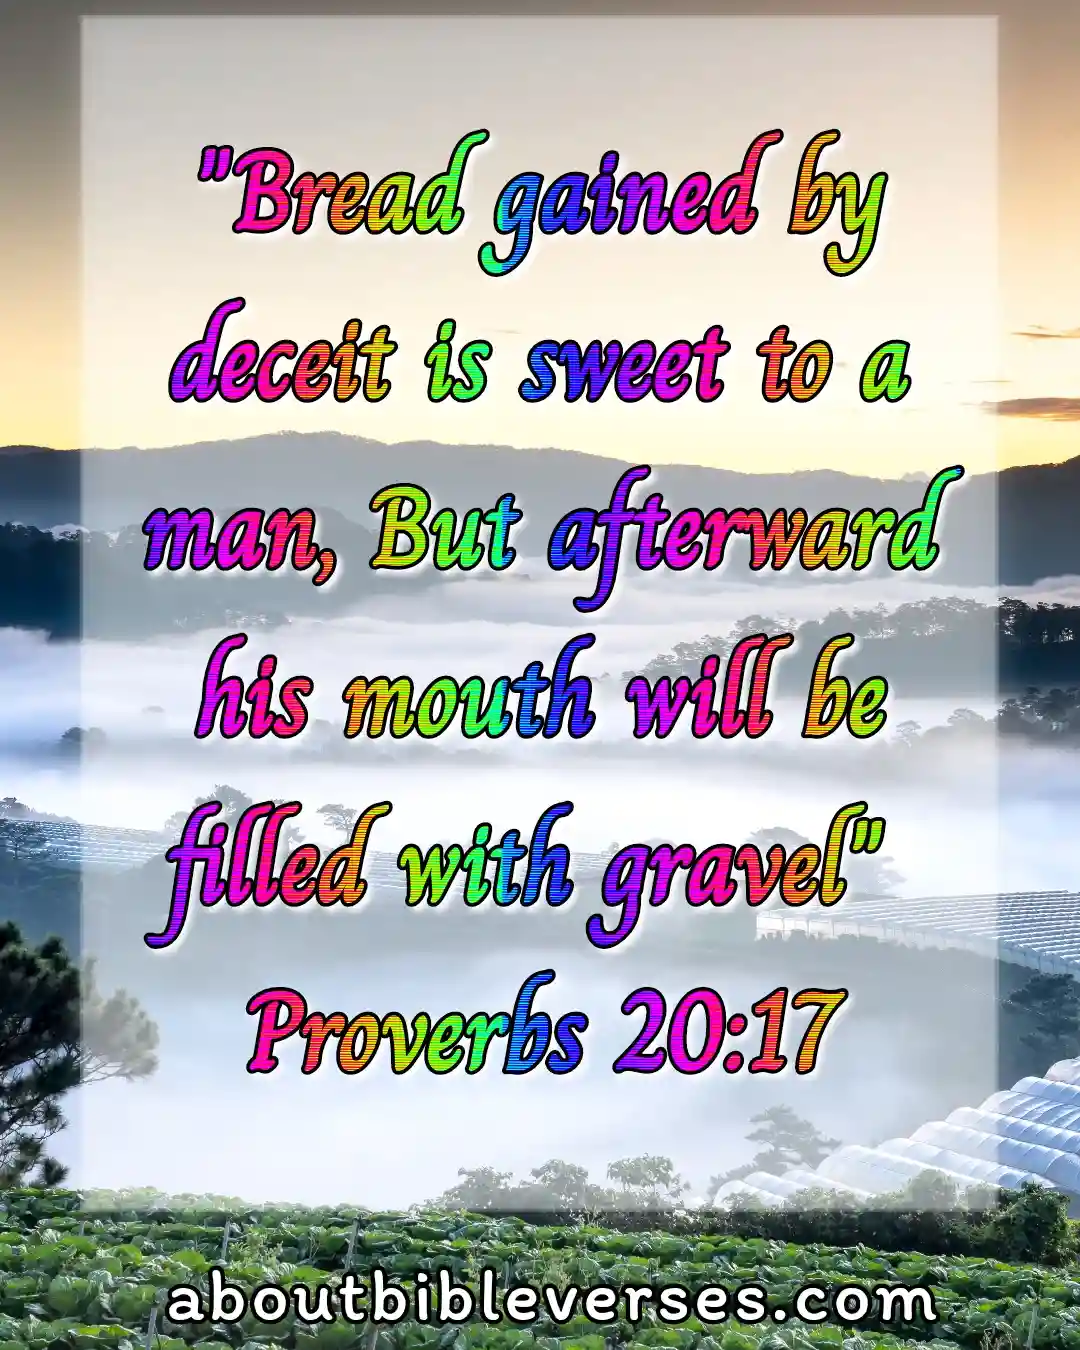 bible verses lying and deceit (Proverbs 20:17)